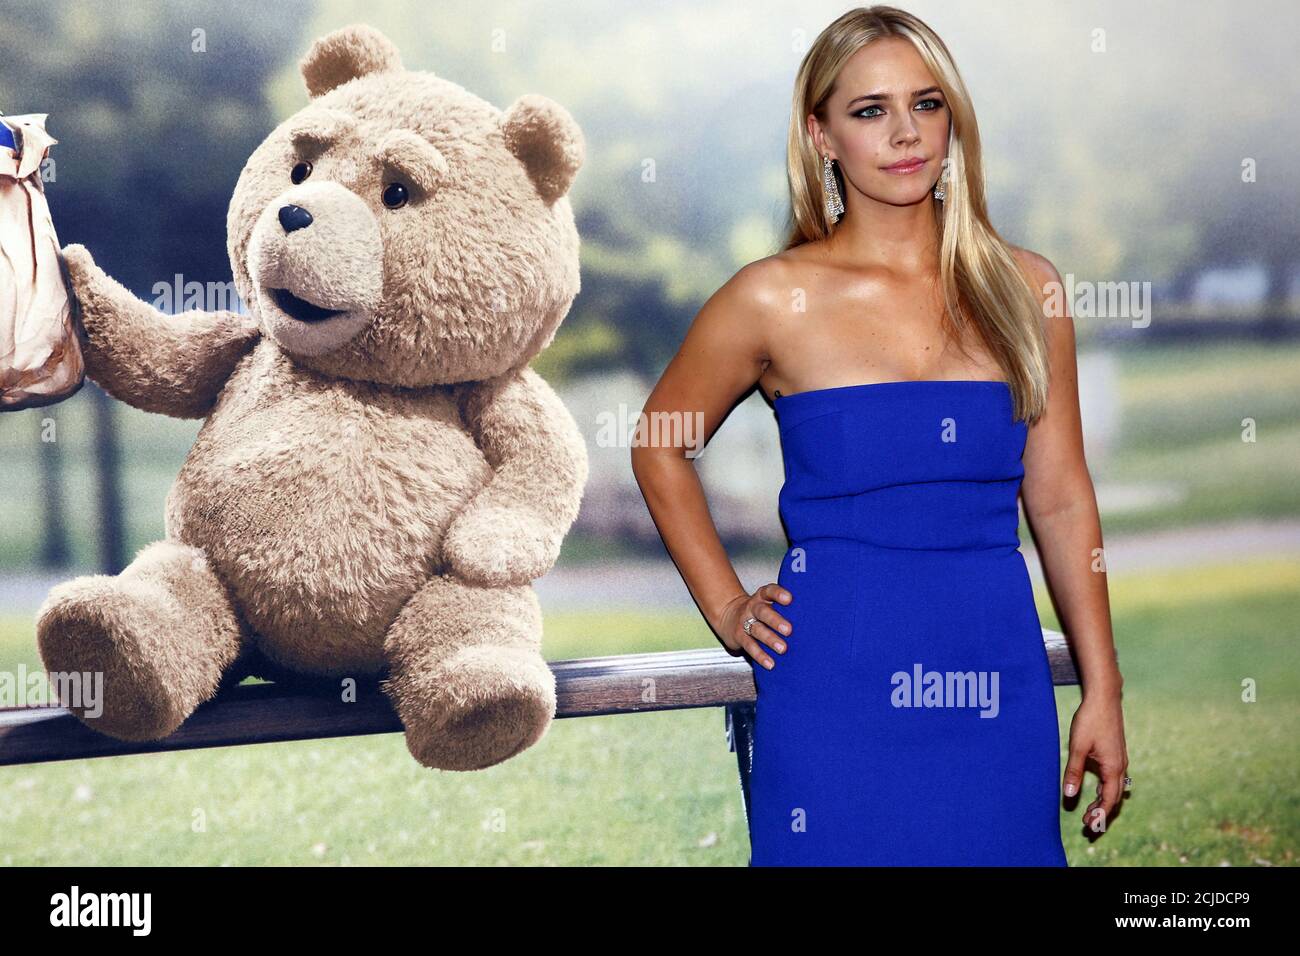 Cast Member Jessica Barth Poses On The Red Carpet Of The Movie Premiere Of Ted 2 In New York June 24 2015 Reuters Shannon Stapleton Stock Photo Alamy